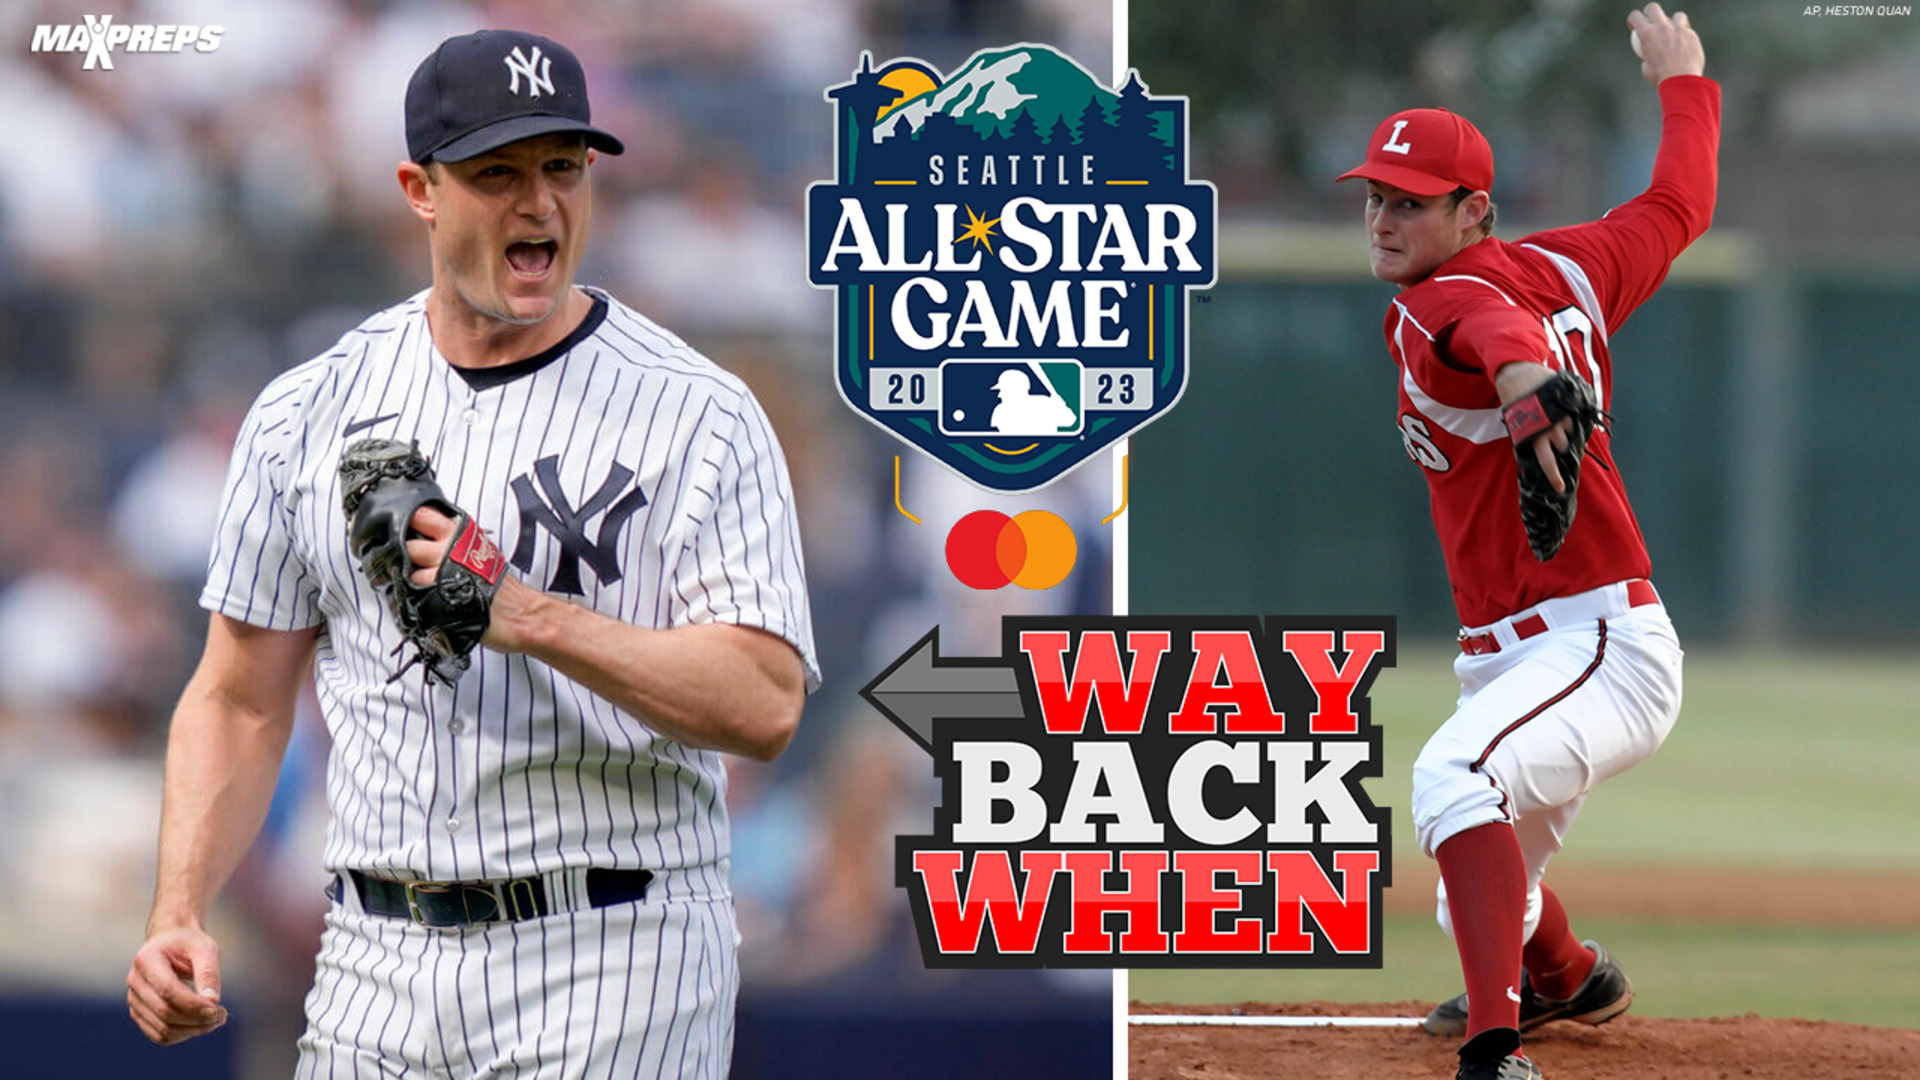 Best MLB All-Star Games ever: Ranking top All-Star Games in MLB